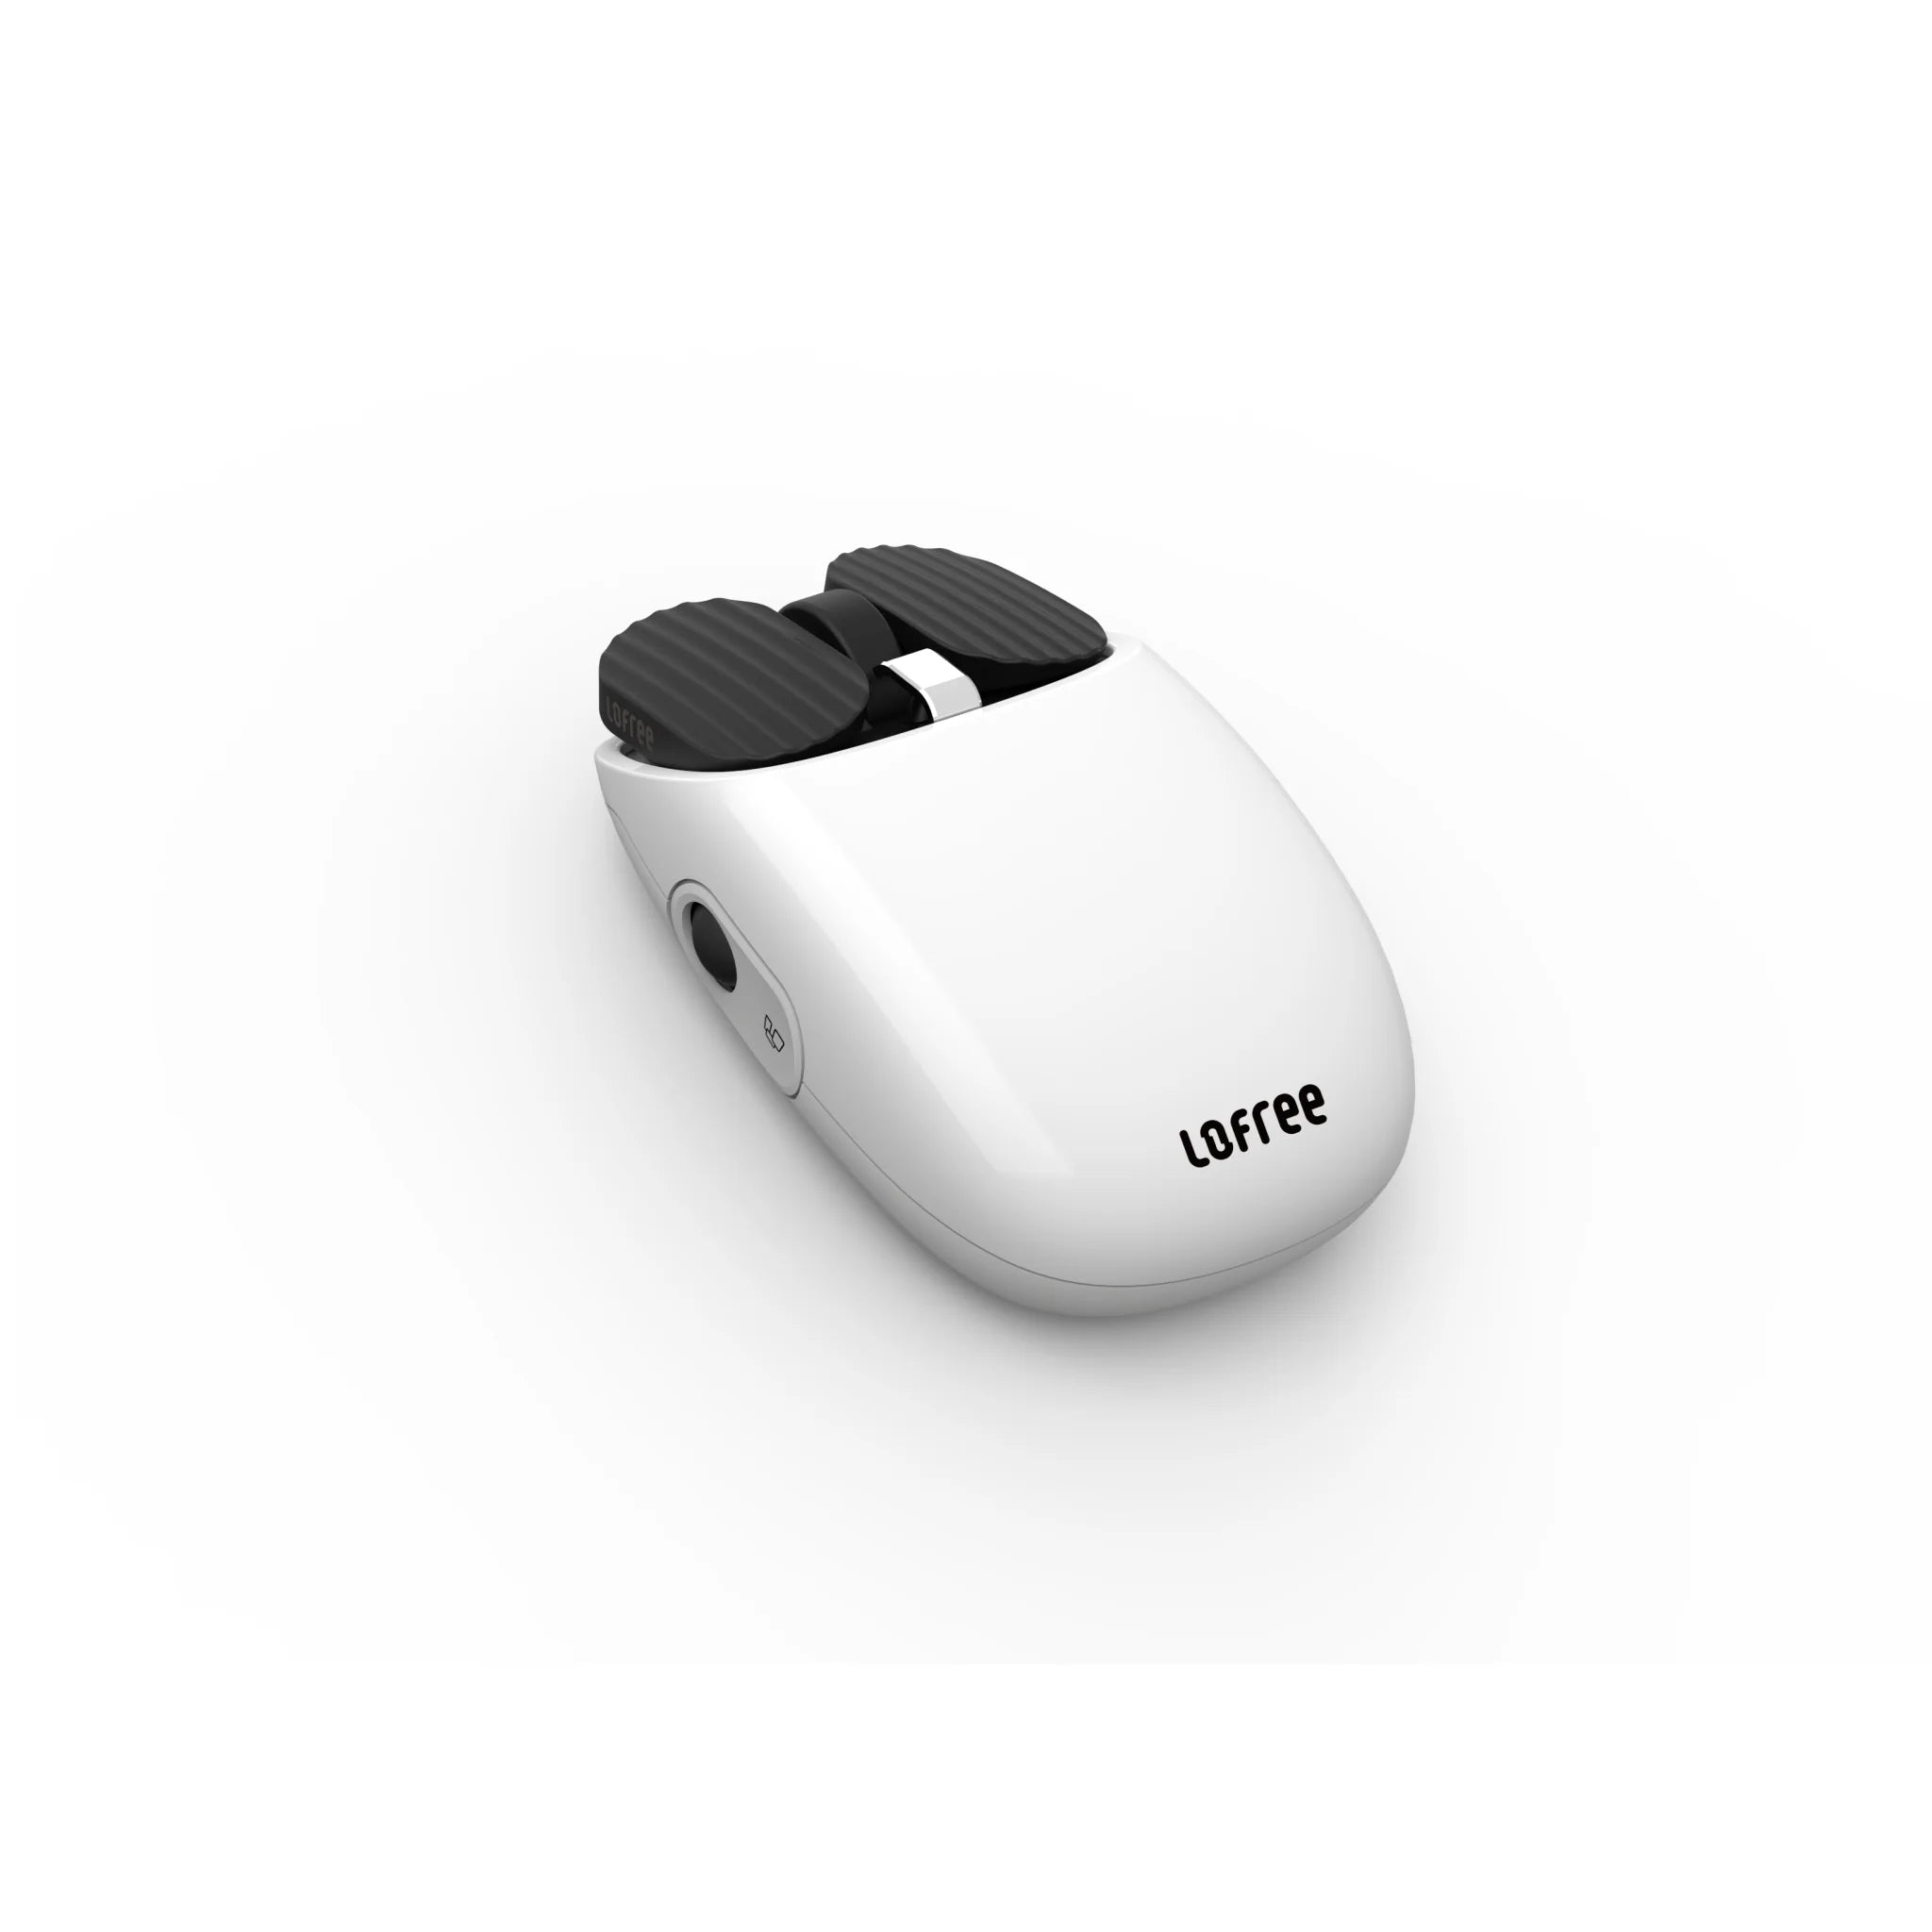 LOFREE "Wavy Chips" Bluetooth Mouse - KeebsForAll